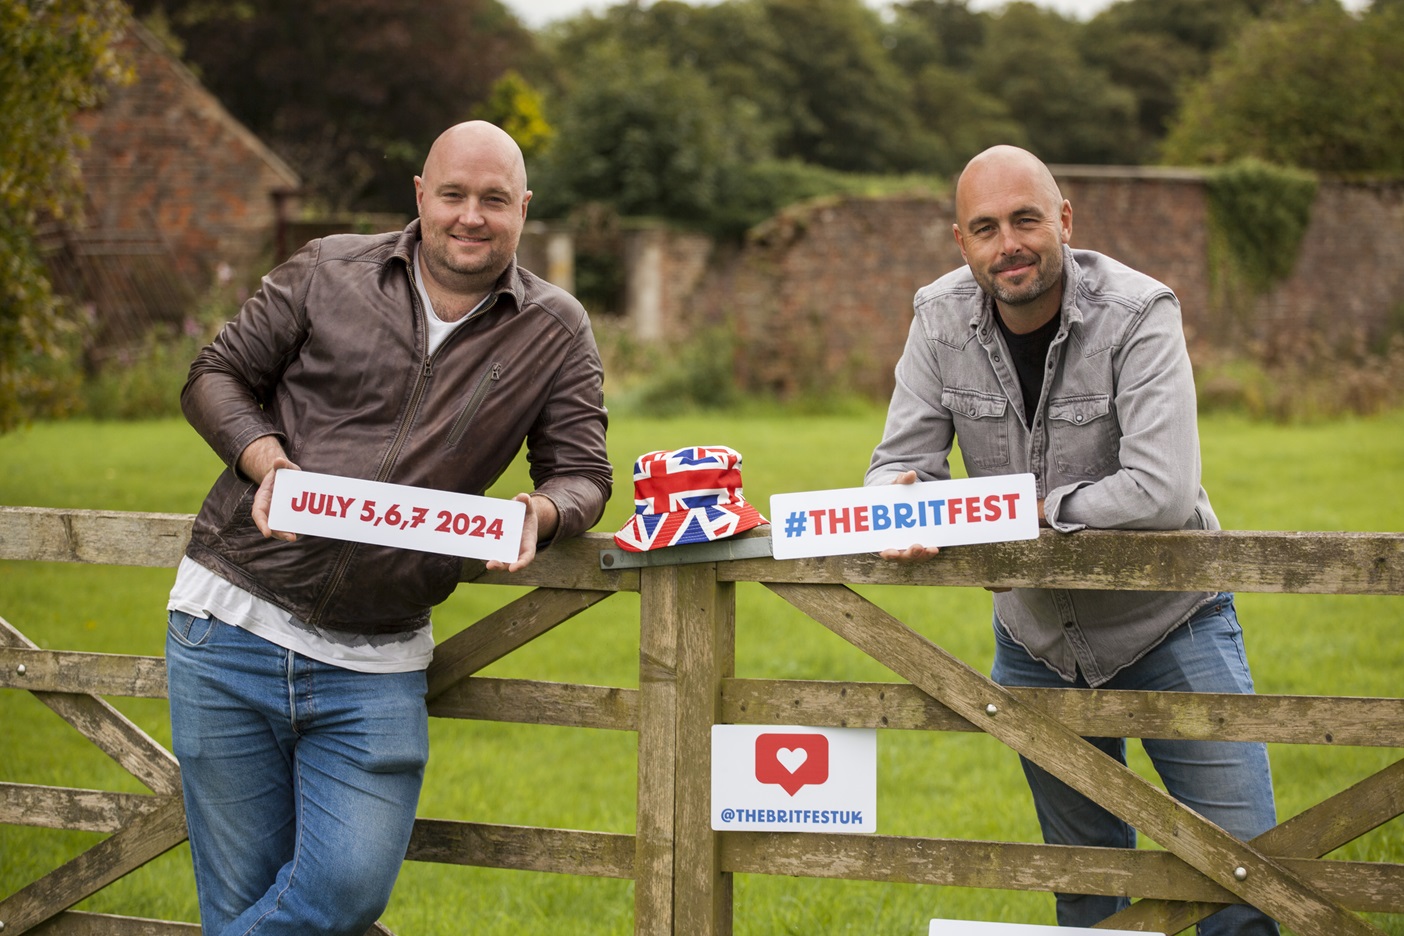 The Brit Fest will be the perfect first festival for families, organisers say